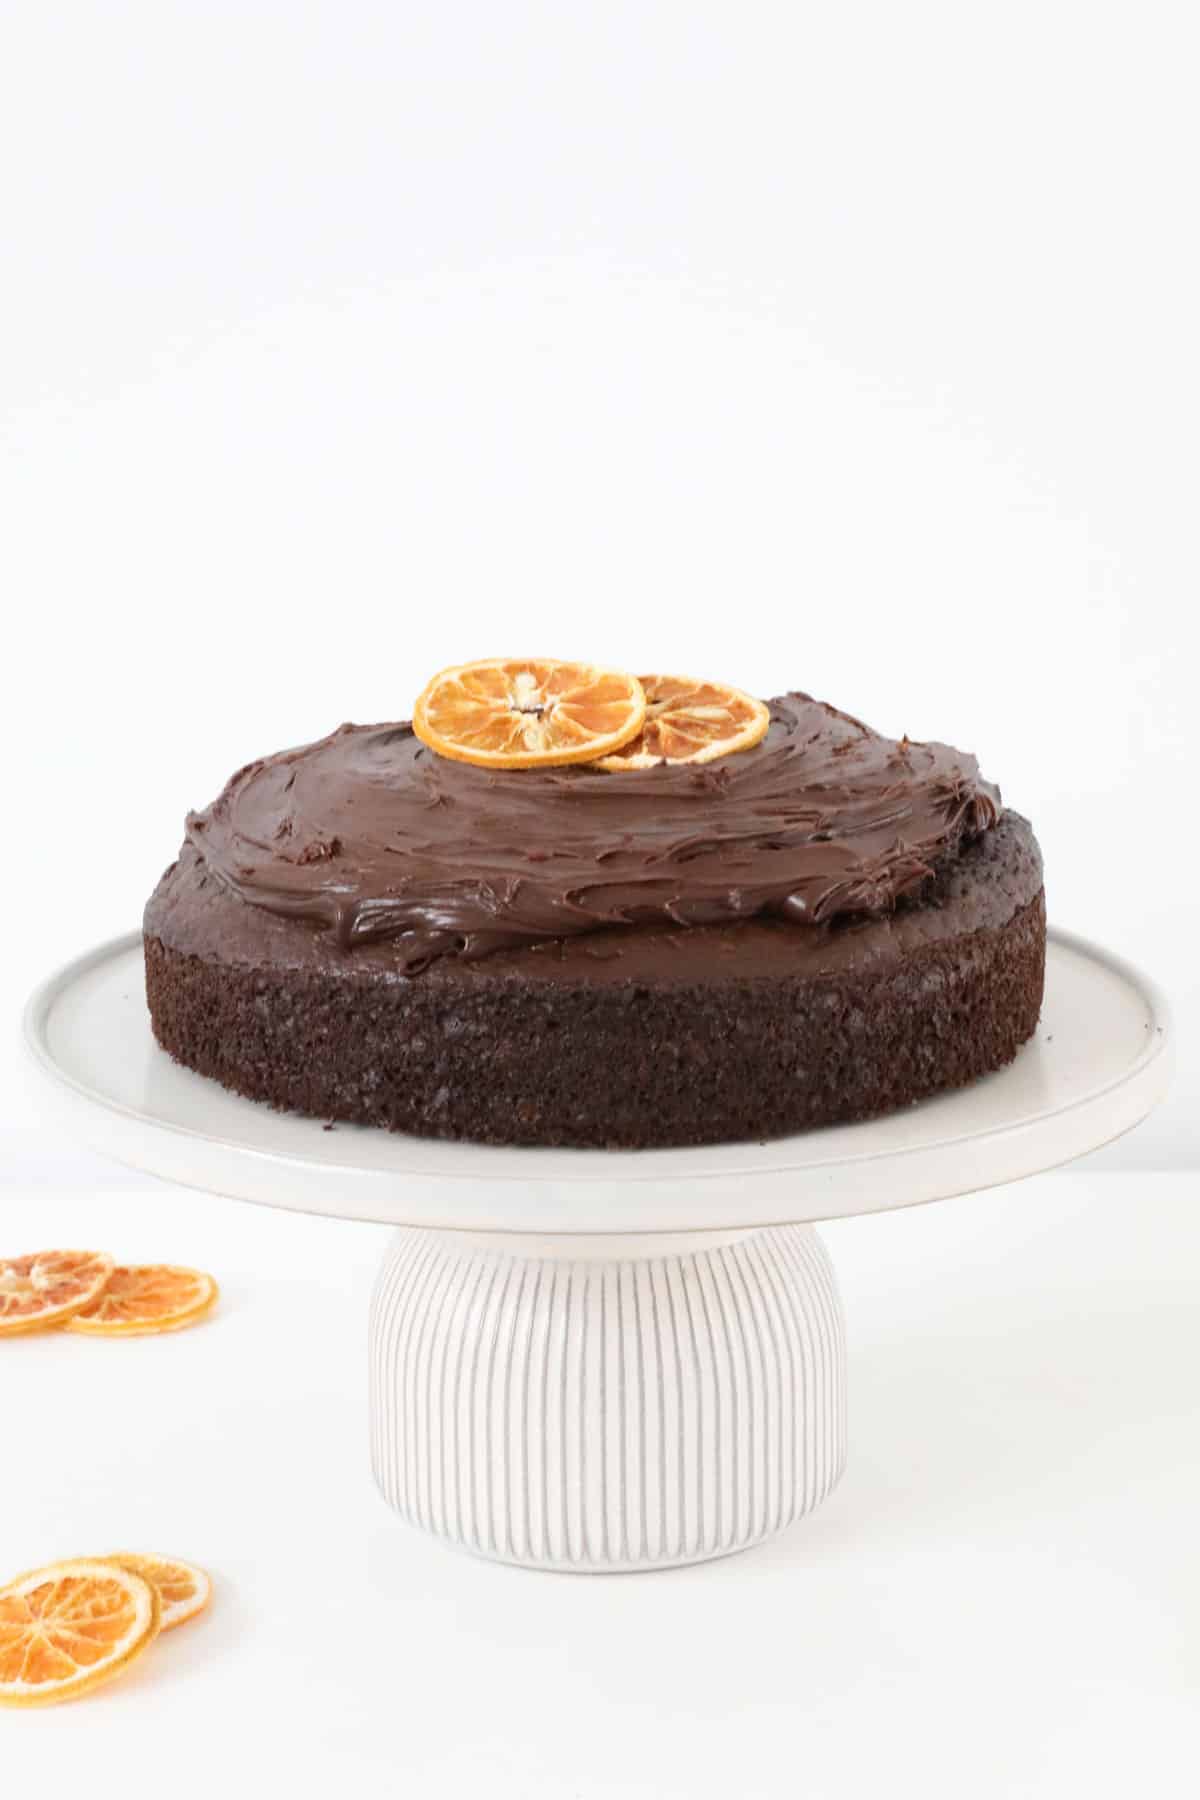 Chocolate orange cake, decorated with slices of dried orange, served on a white cake stand.